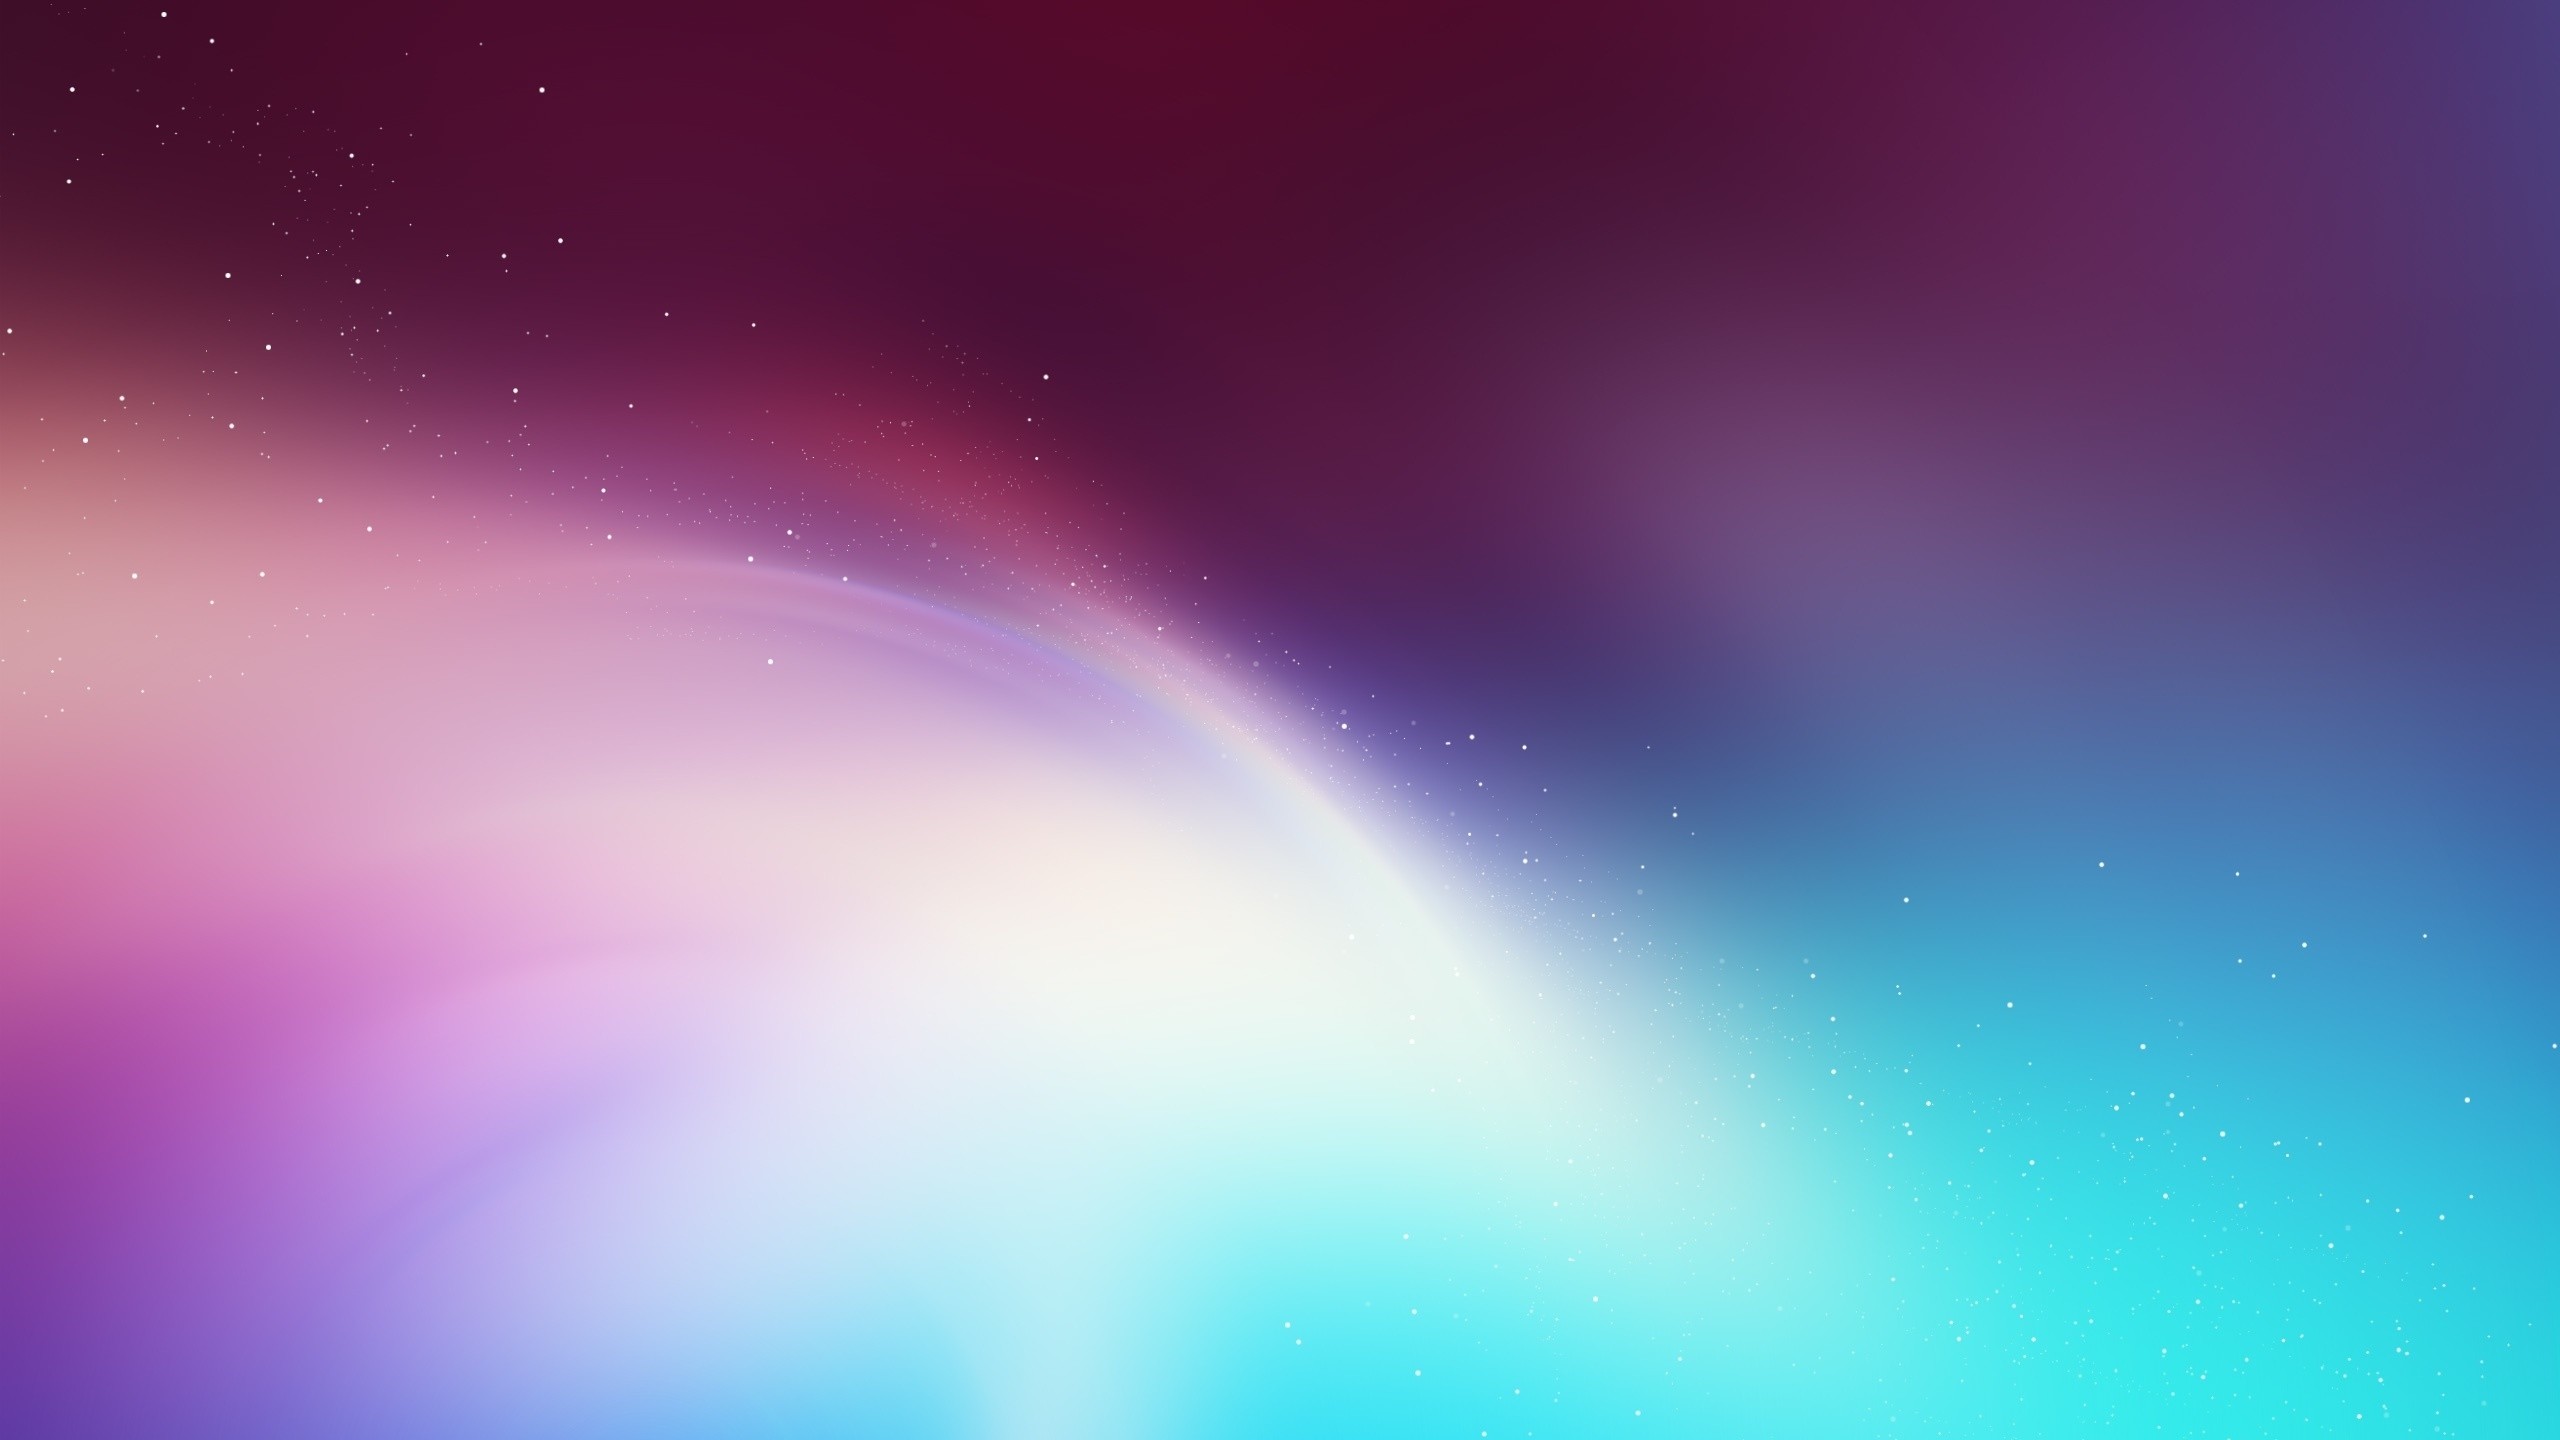 wallpaper for youtube channel,sky,blue,purple,atmosphere,violet